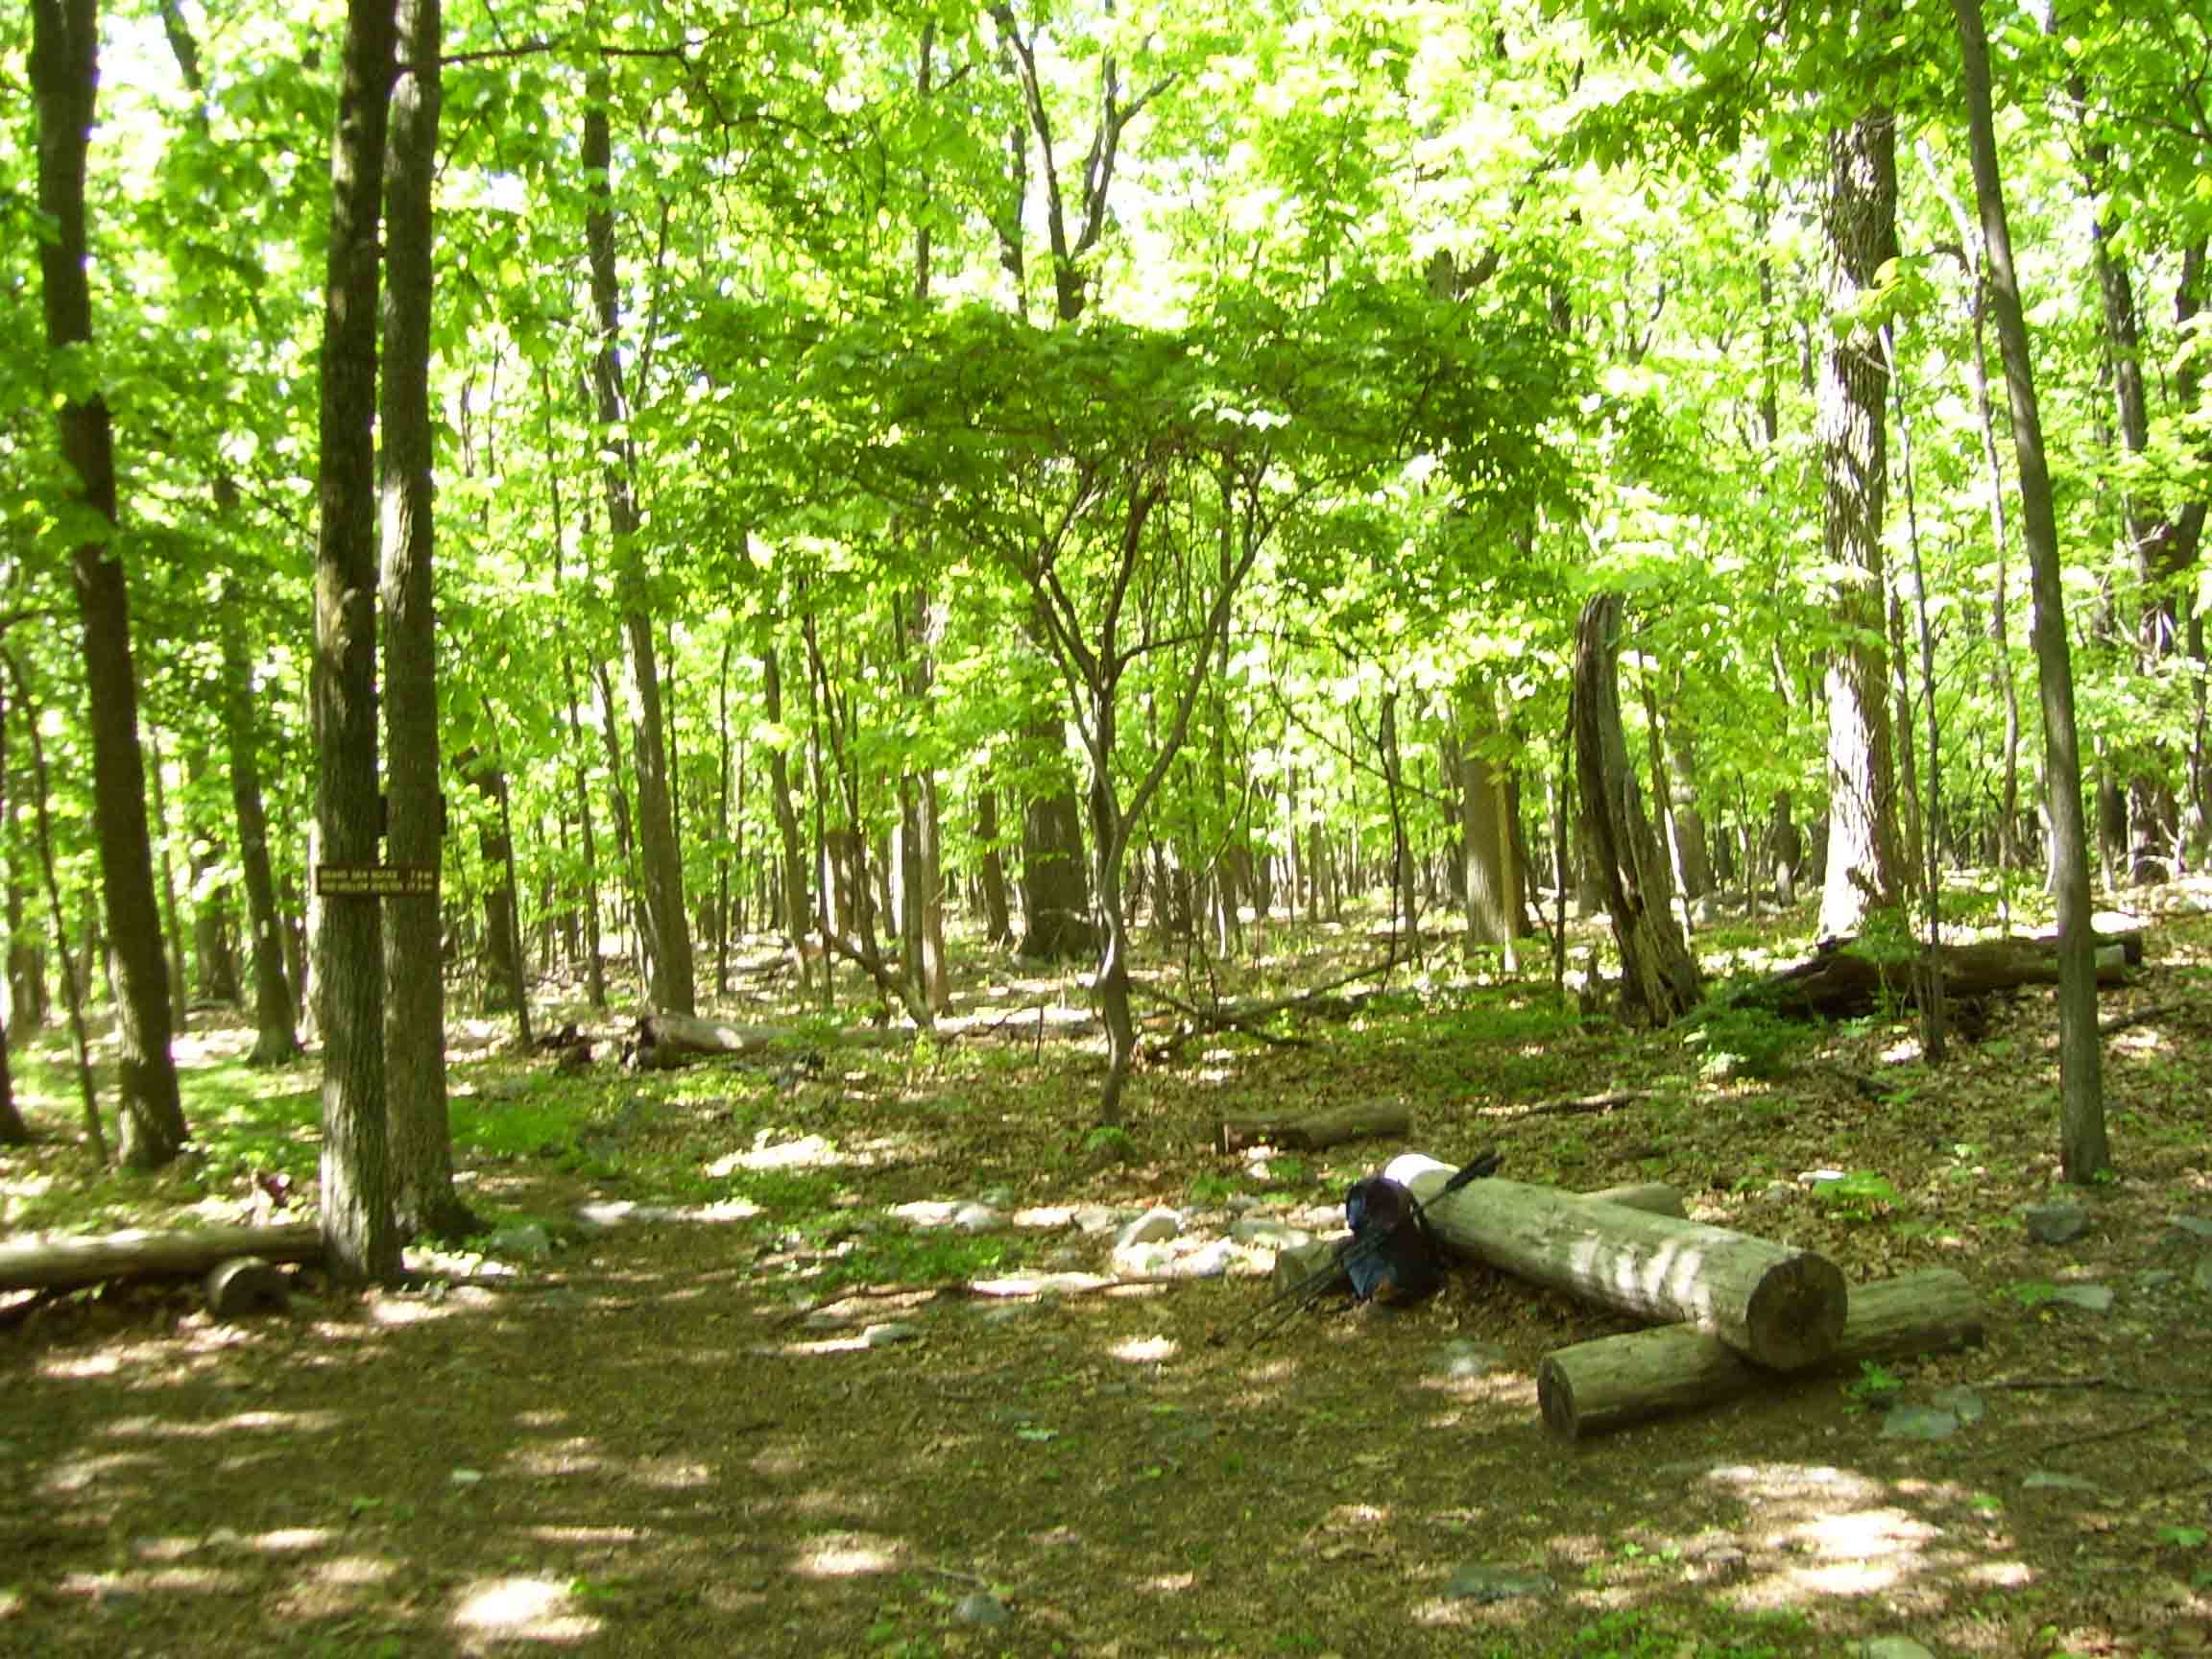 Some of the log "benches" installed by the PATC at the junction of the AT and the more southern access trail to the Blackburn Trail Center (Mile 6.4). Courtesy dlcul@conncoll.edu